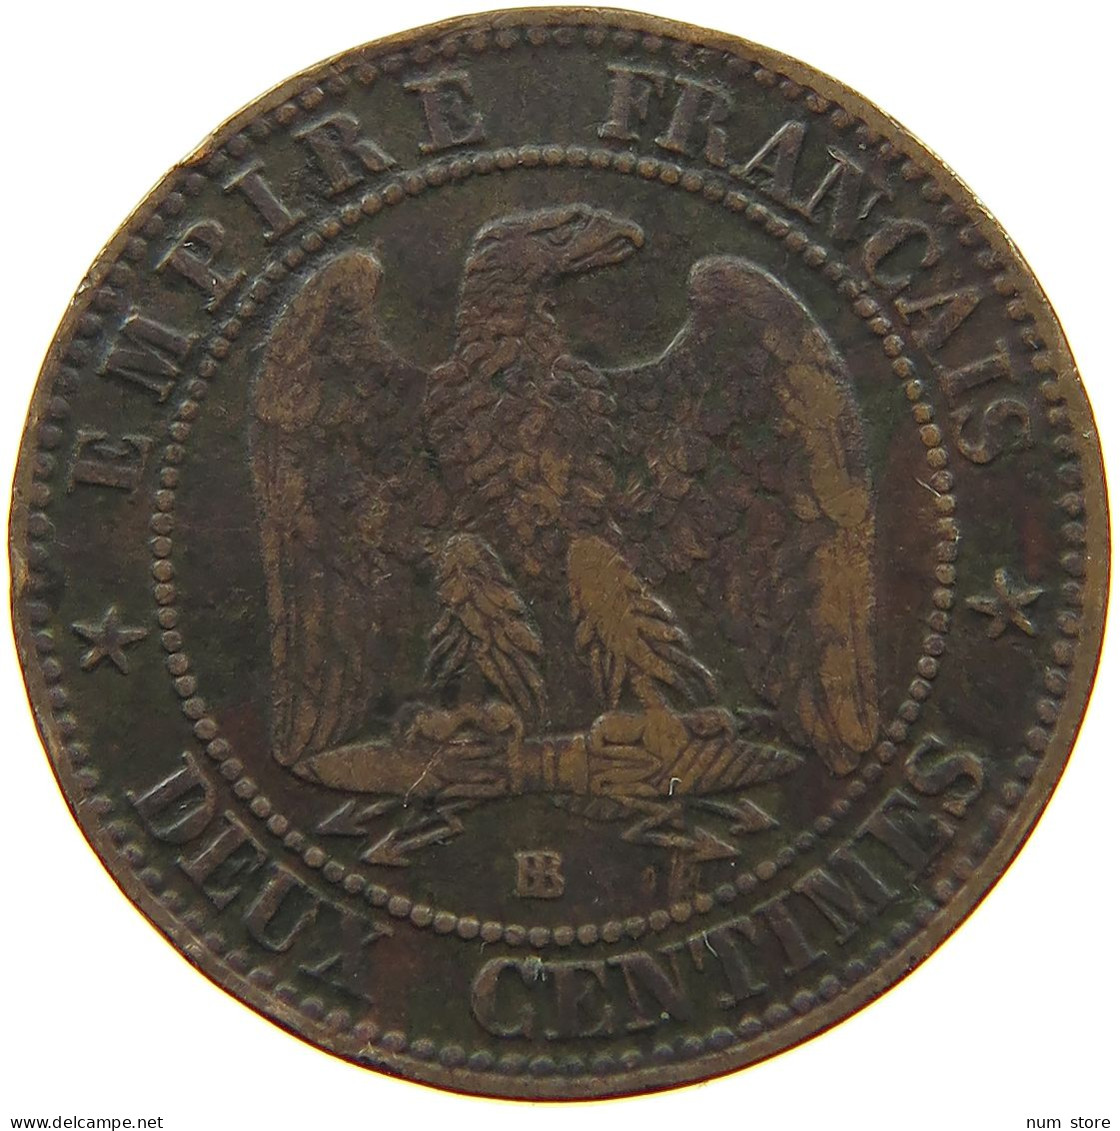 FRANCE 2 CENTIMES 1862 BB Napoleon III. (1852-1870) #a014 0231 - 2 Centimes